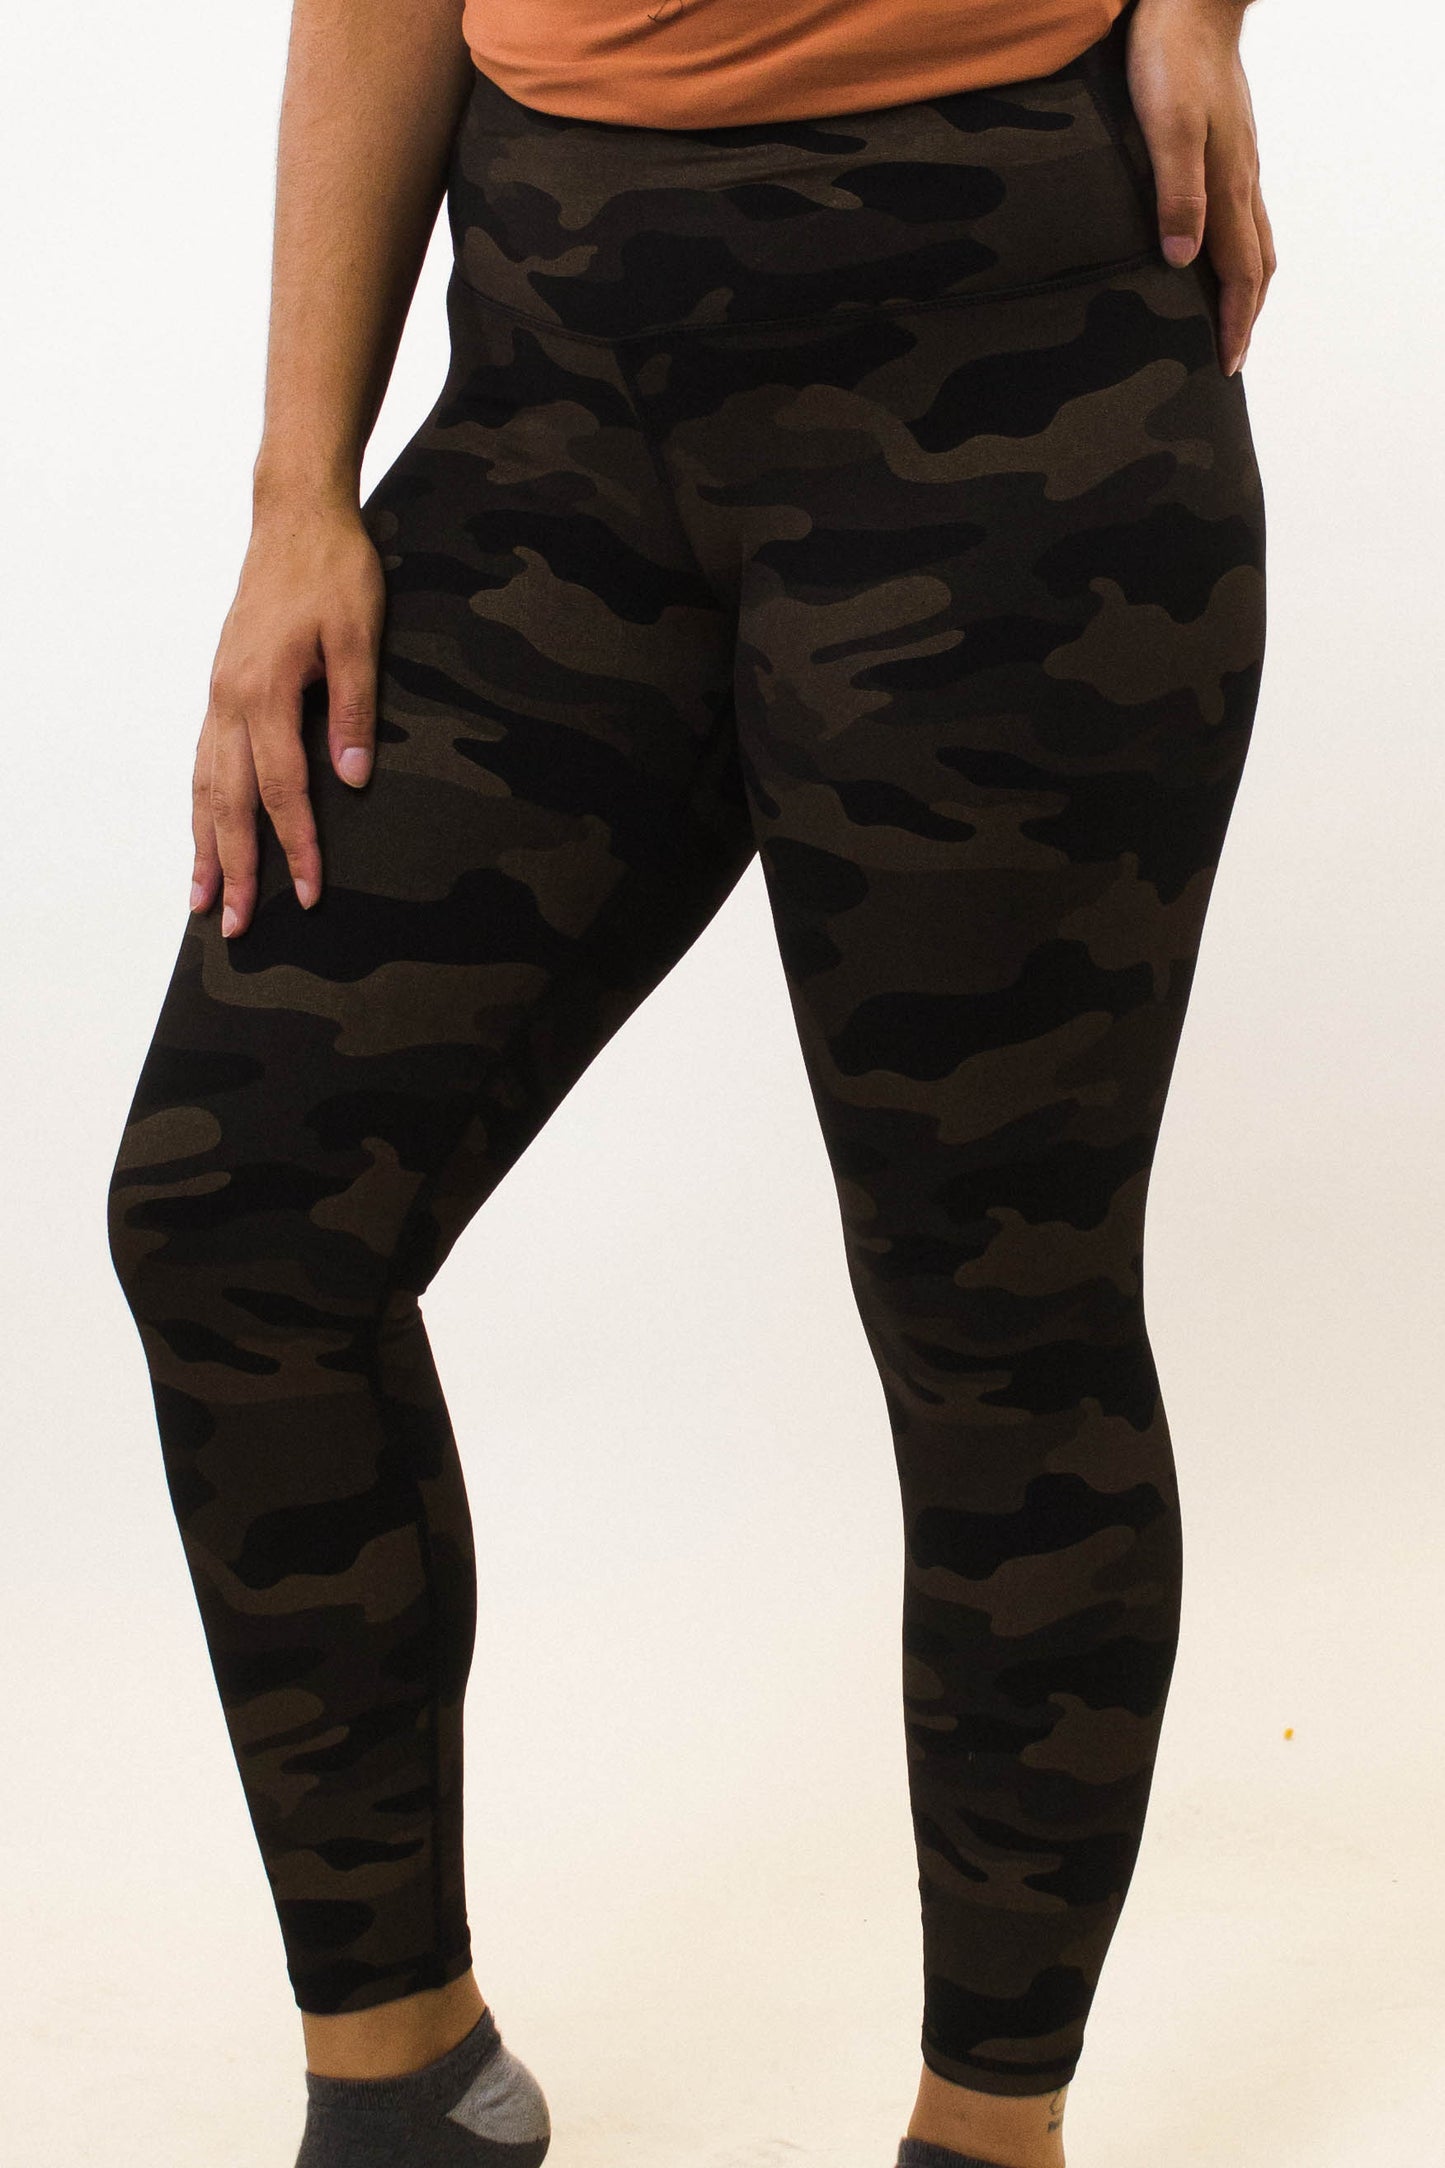 Foil Printed Camo Leggings with Coin Pocket